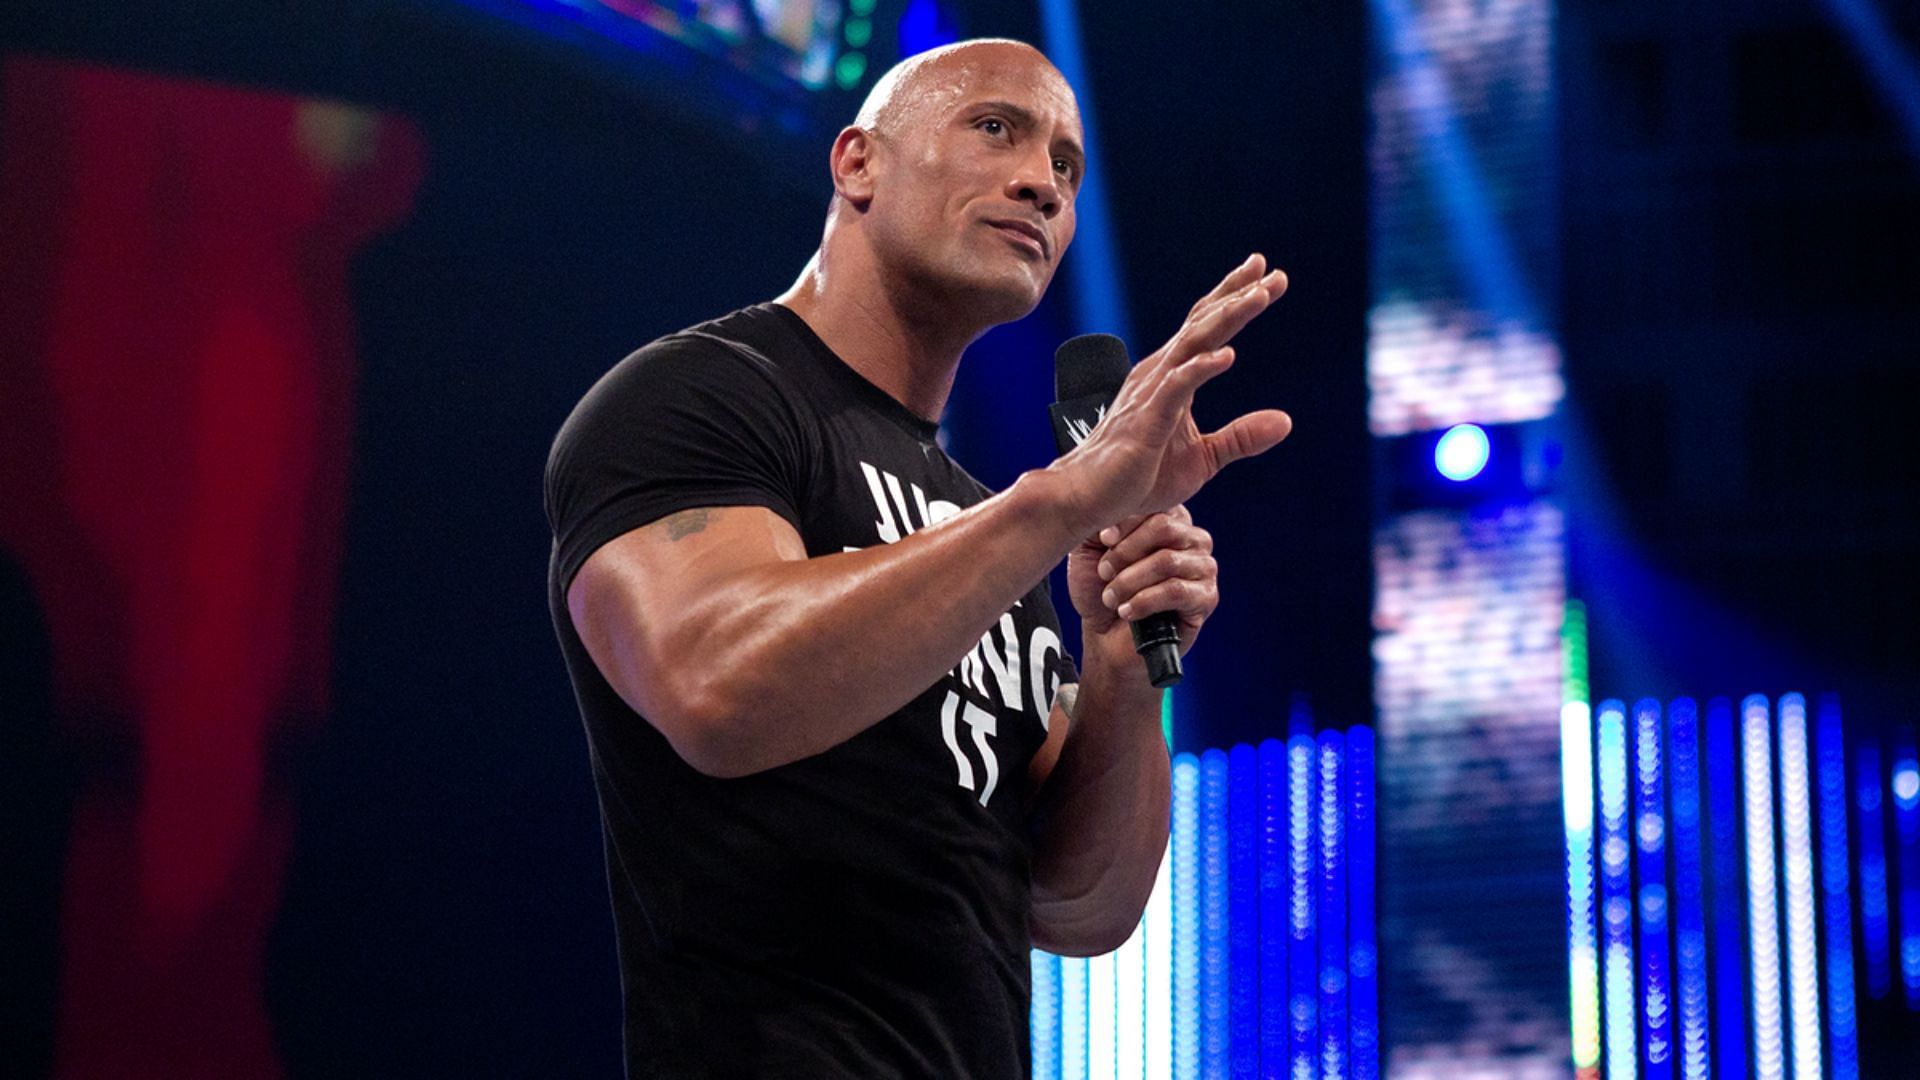 The Rock has been talked about a lot since his SmackDown return